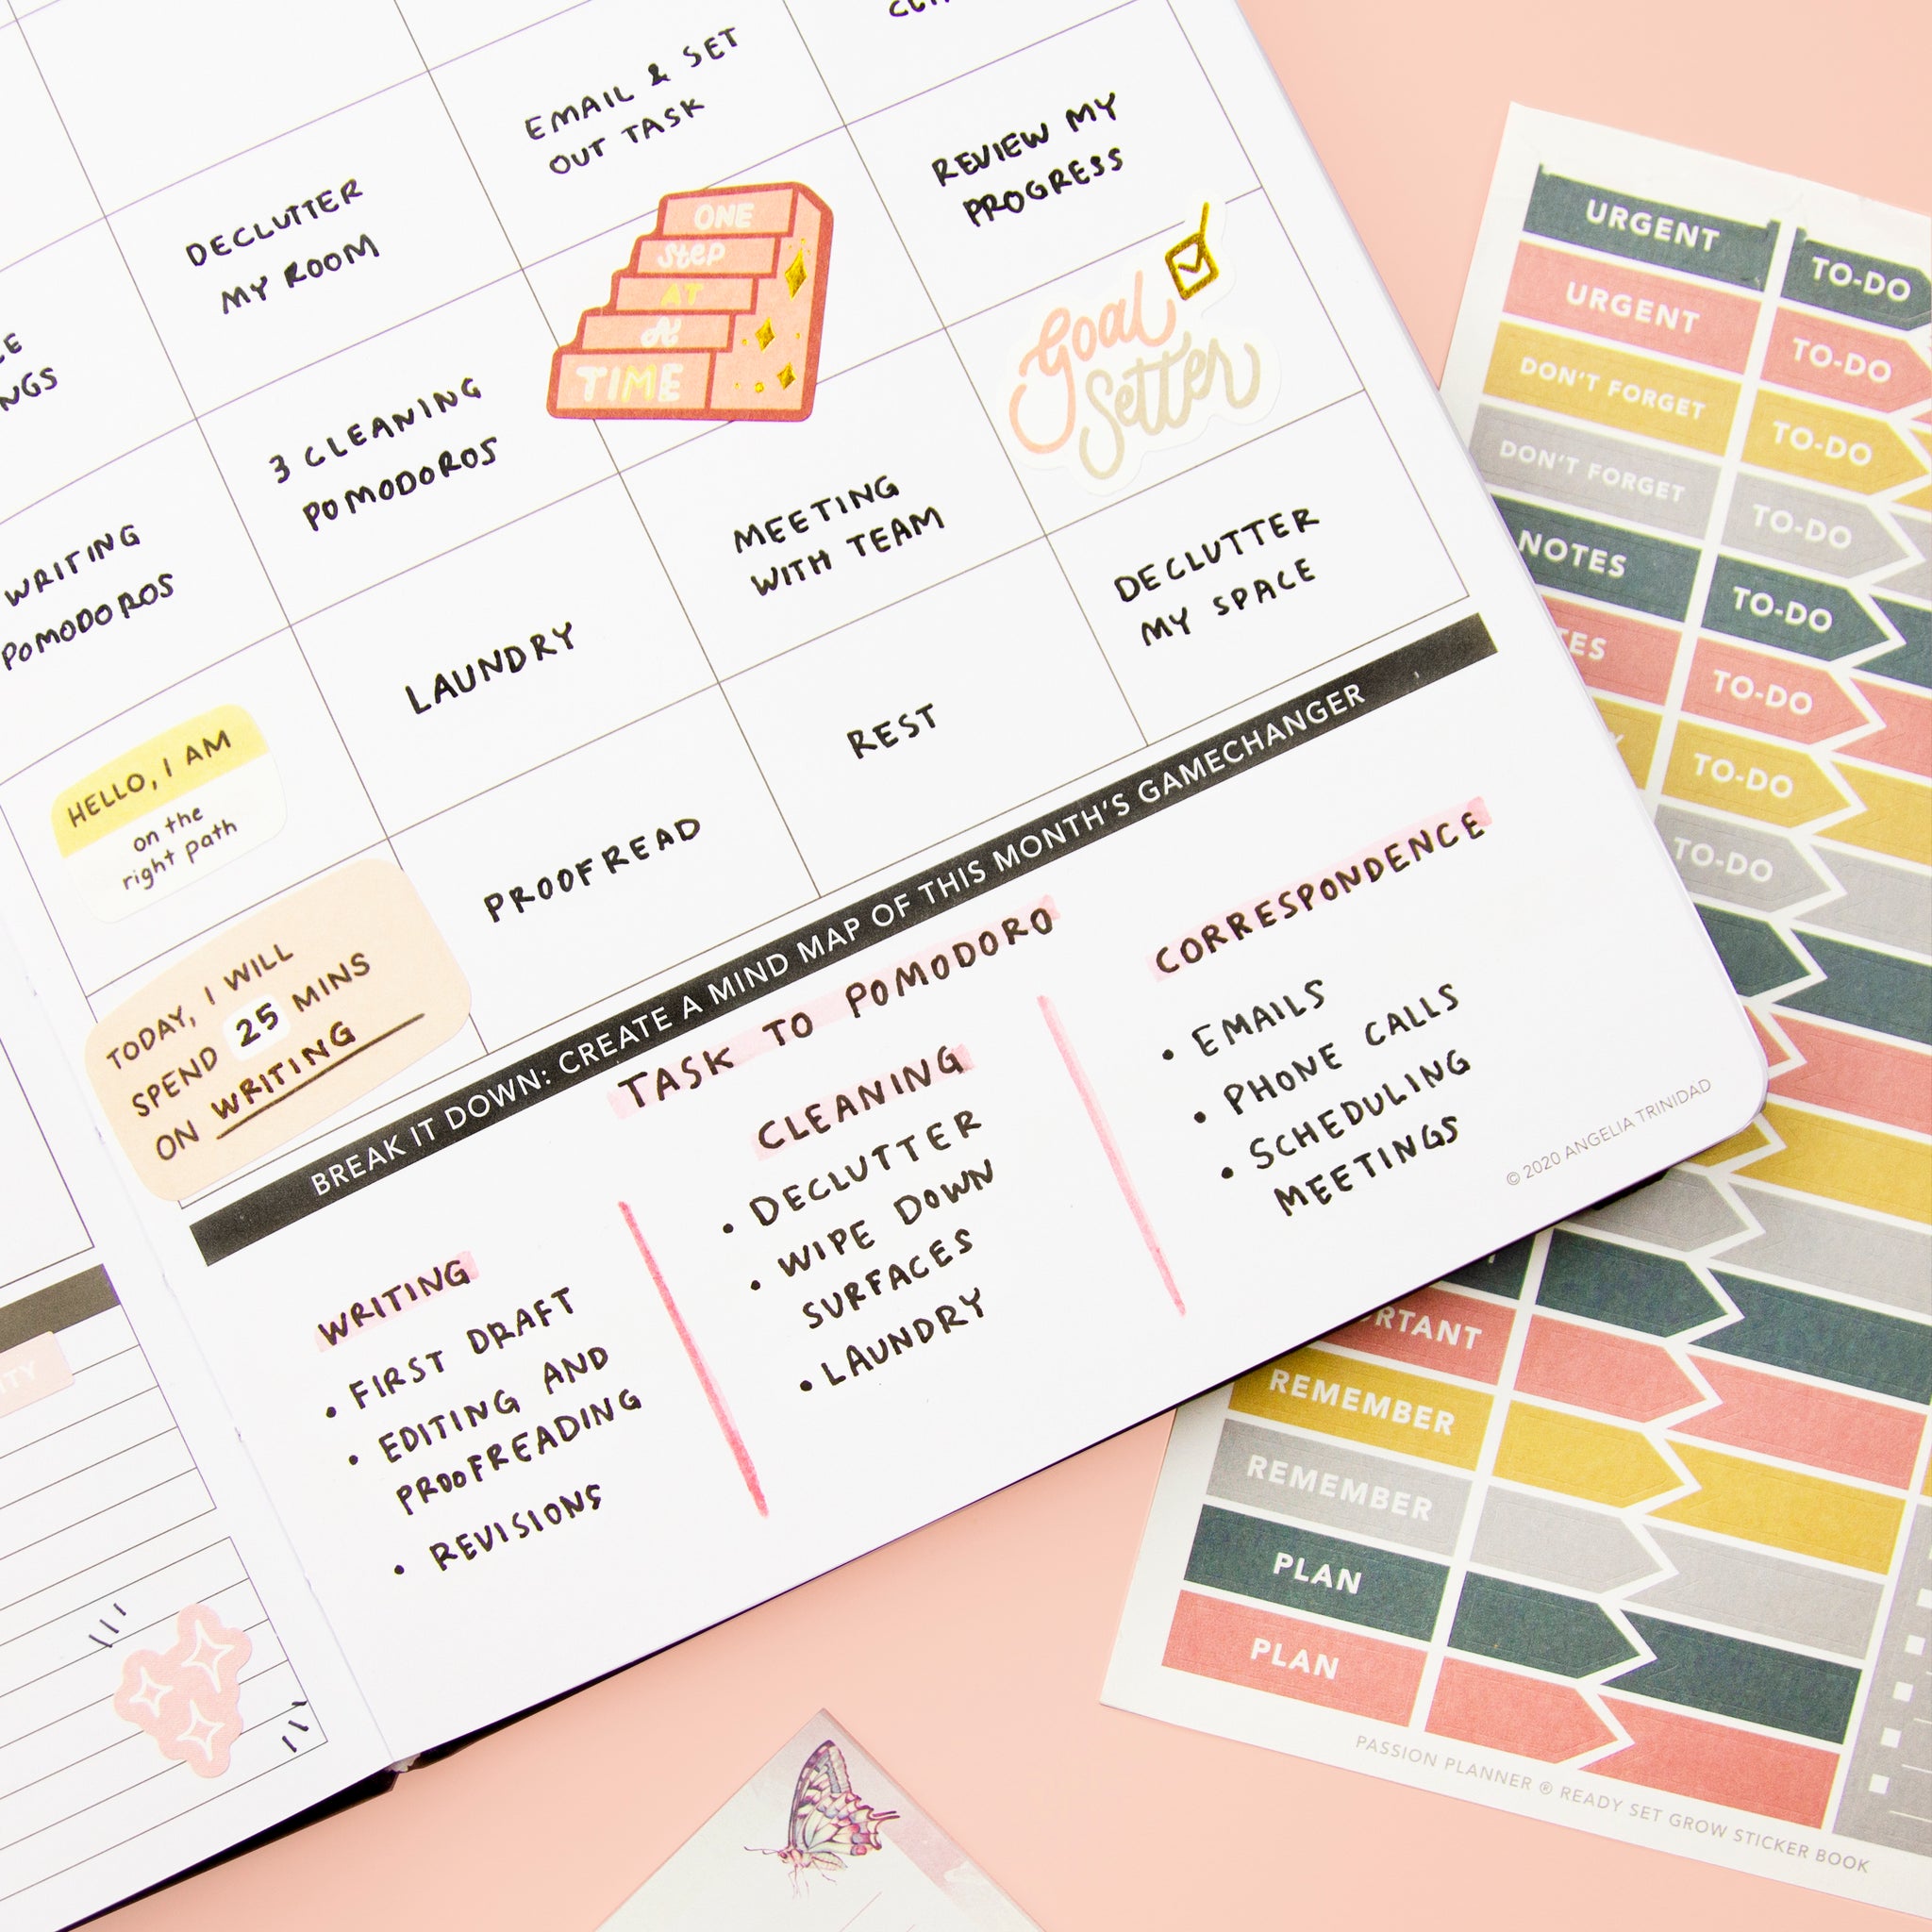 Passion Planner GameChanger List: Tasks to Pomodoro Examples: Writing, Cleaning, Correspondence